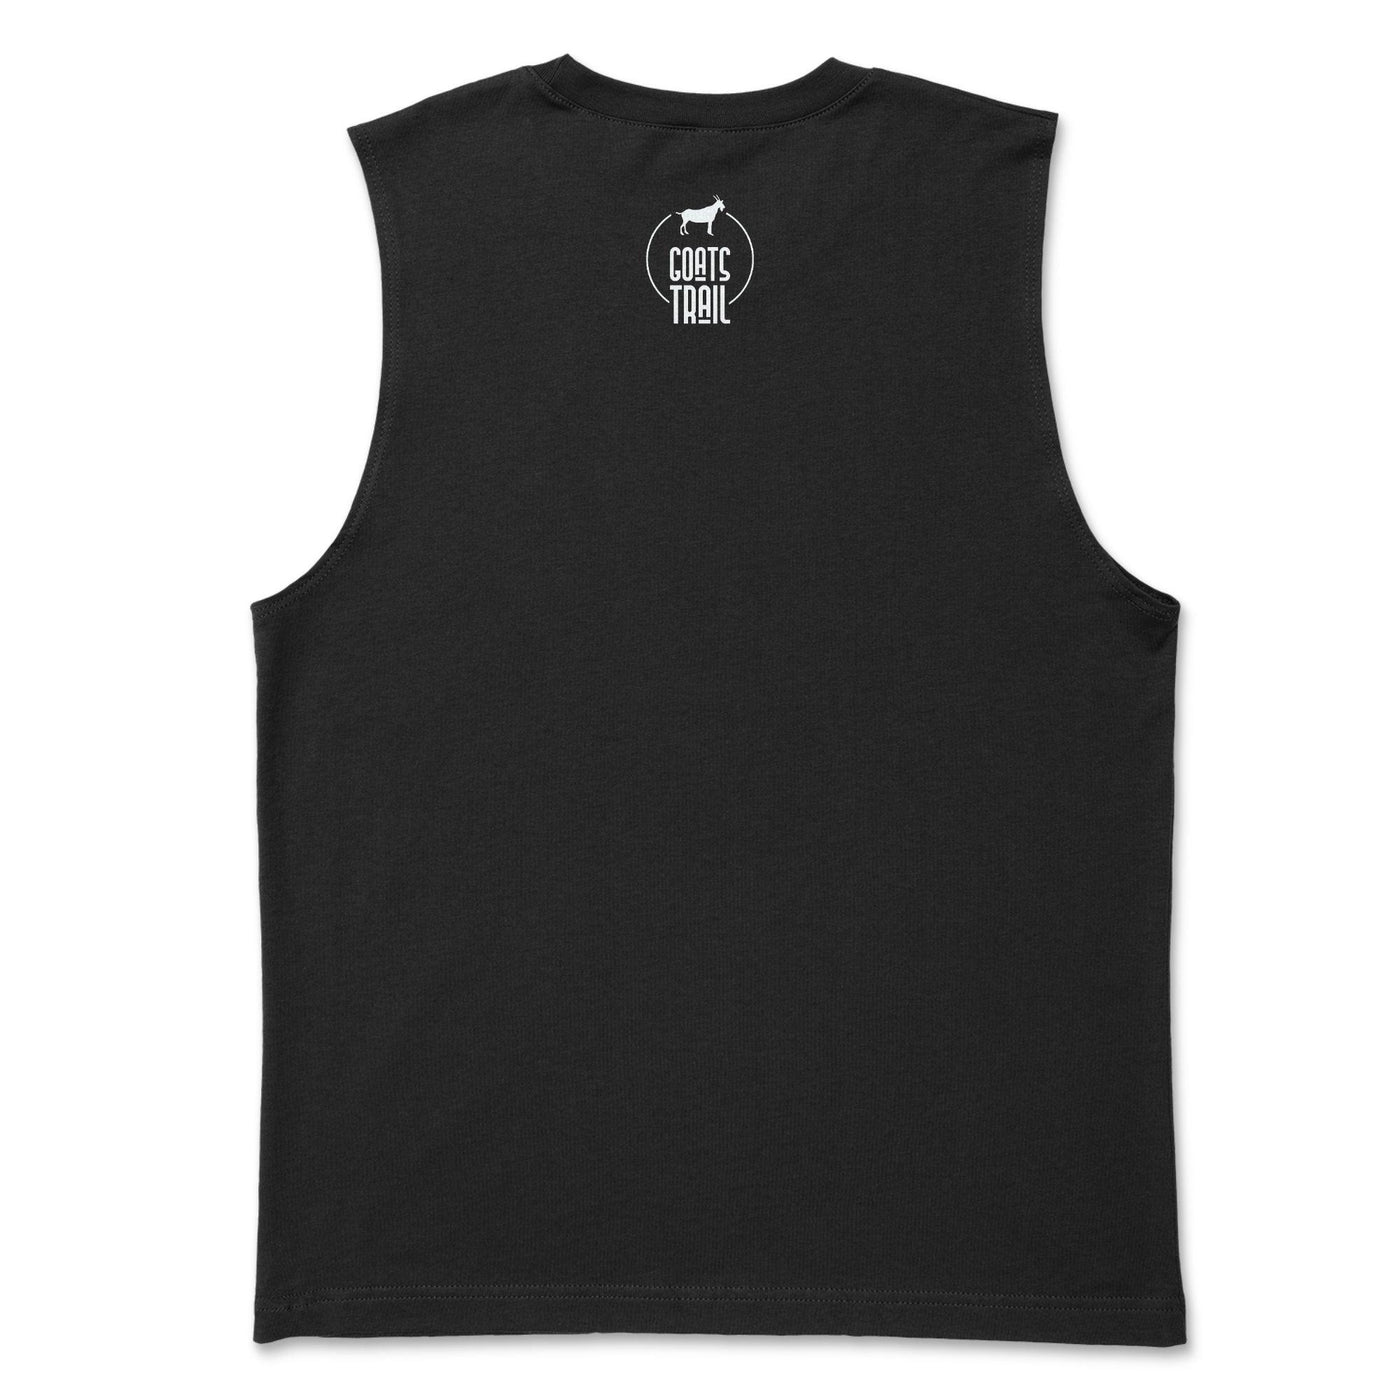 Just Gonna Send It Men's Muscle Tank - Goats Trail